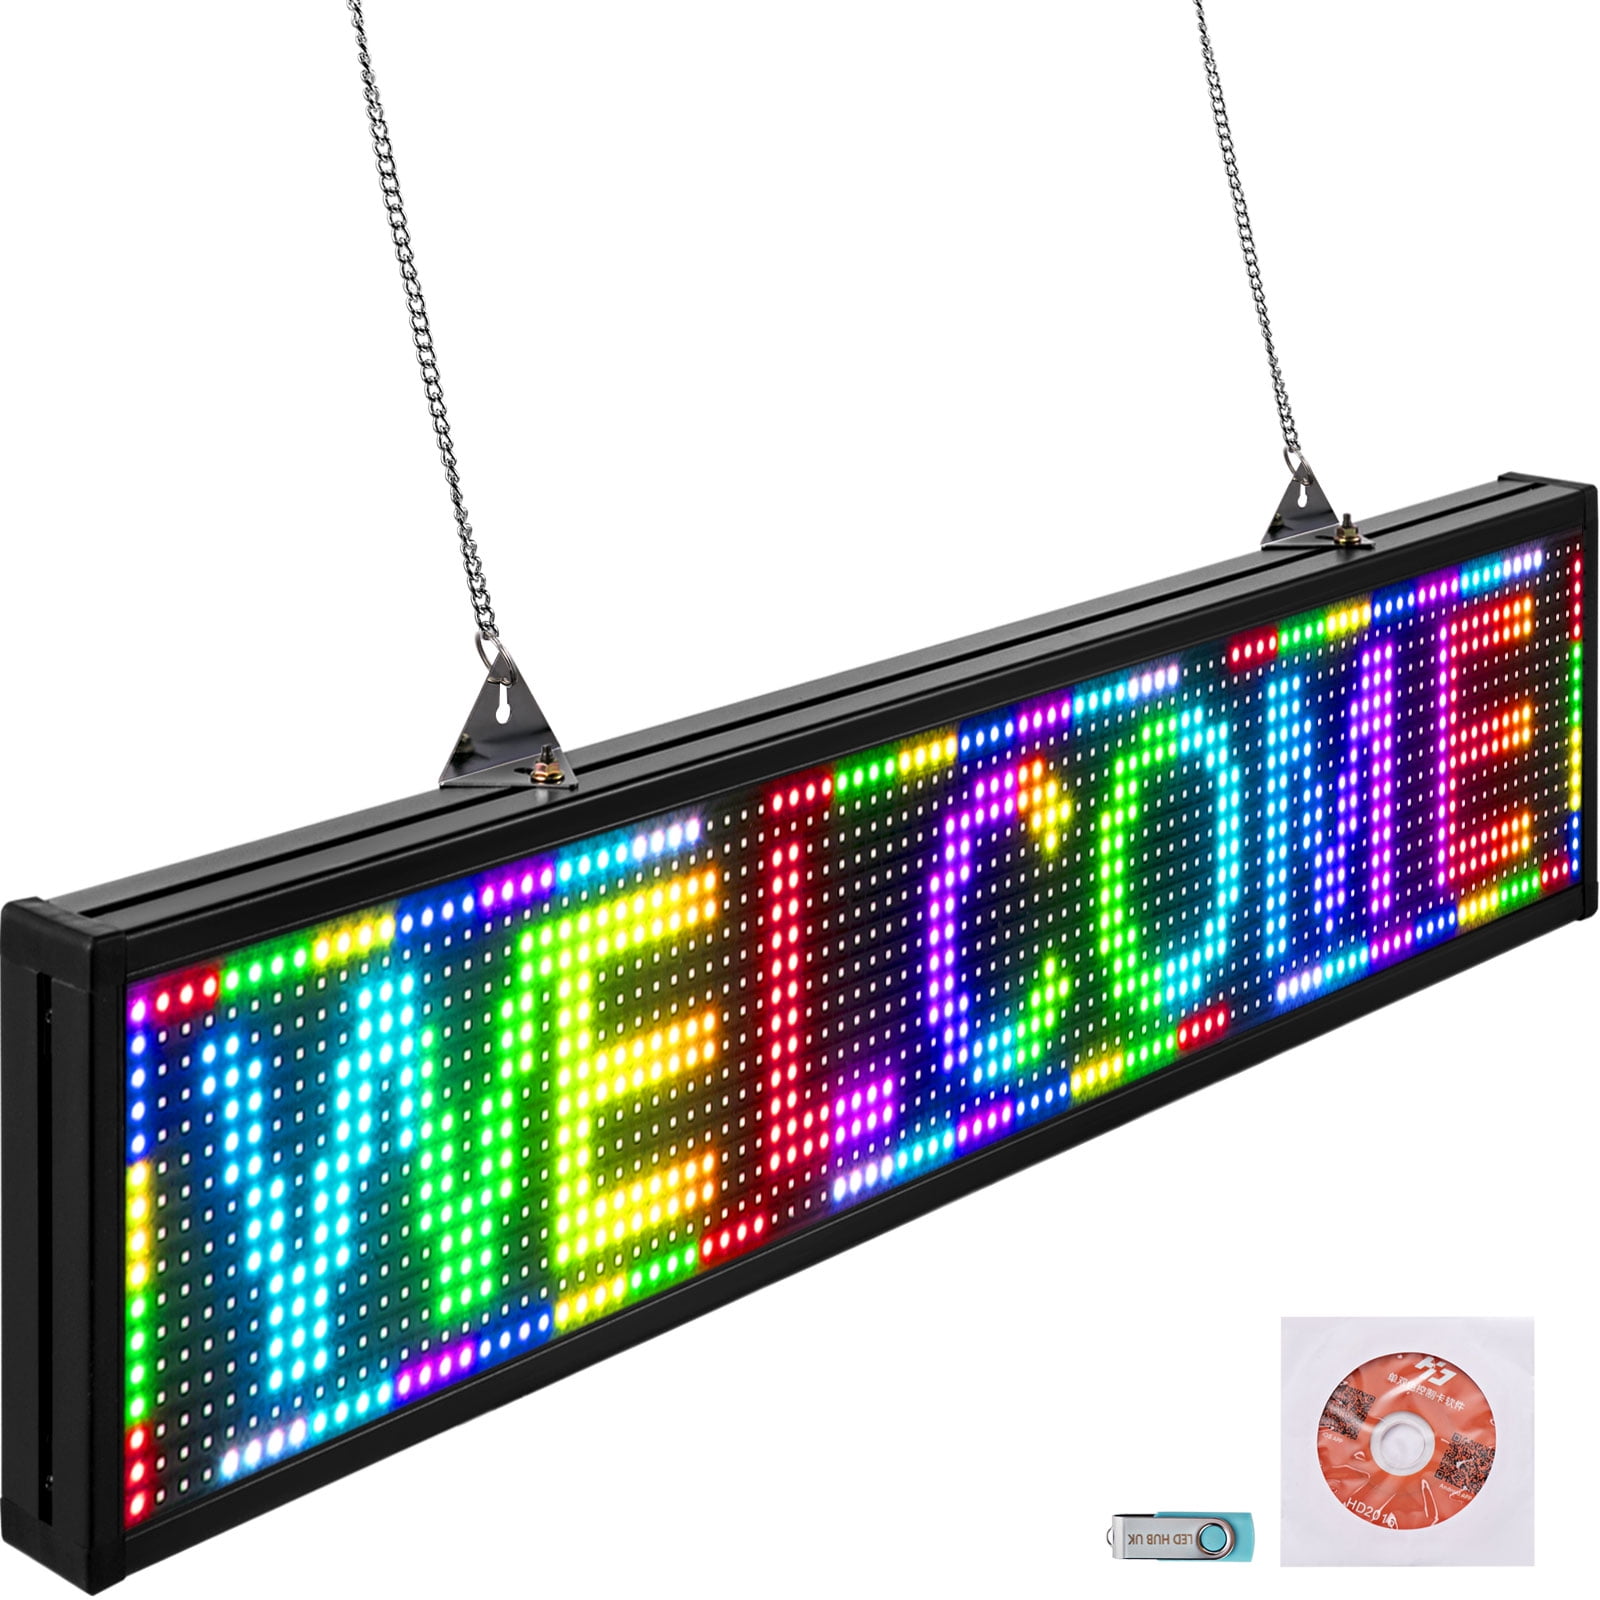 VEVOR Led Sign 38 x 6.5 Digital Sign 96 x 16 HD Resolution Full Color P10 Indoor Led Message Board Digital Display Board Electronic Led Sign Programmable by PC & Wi-Fi